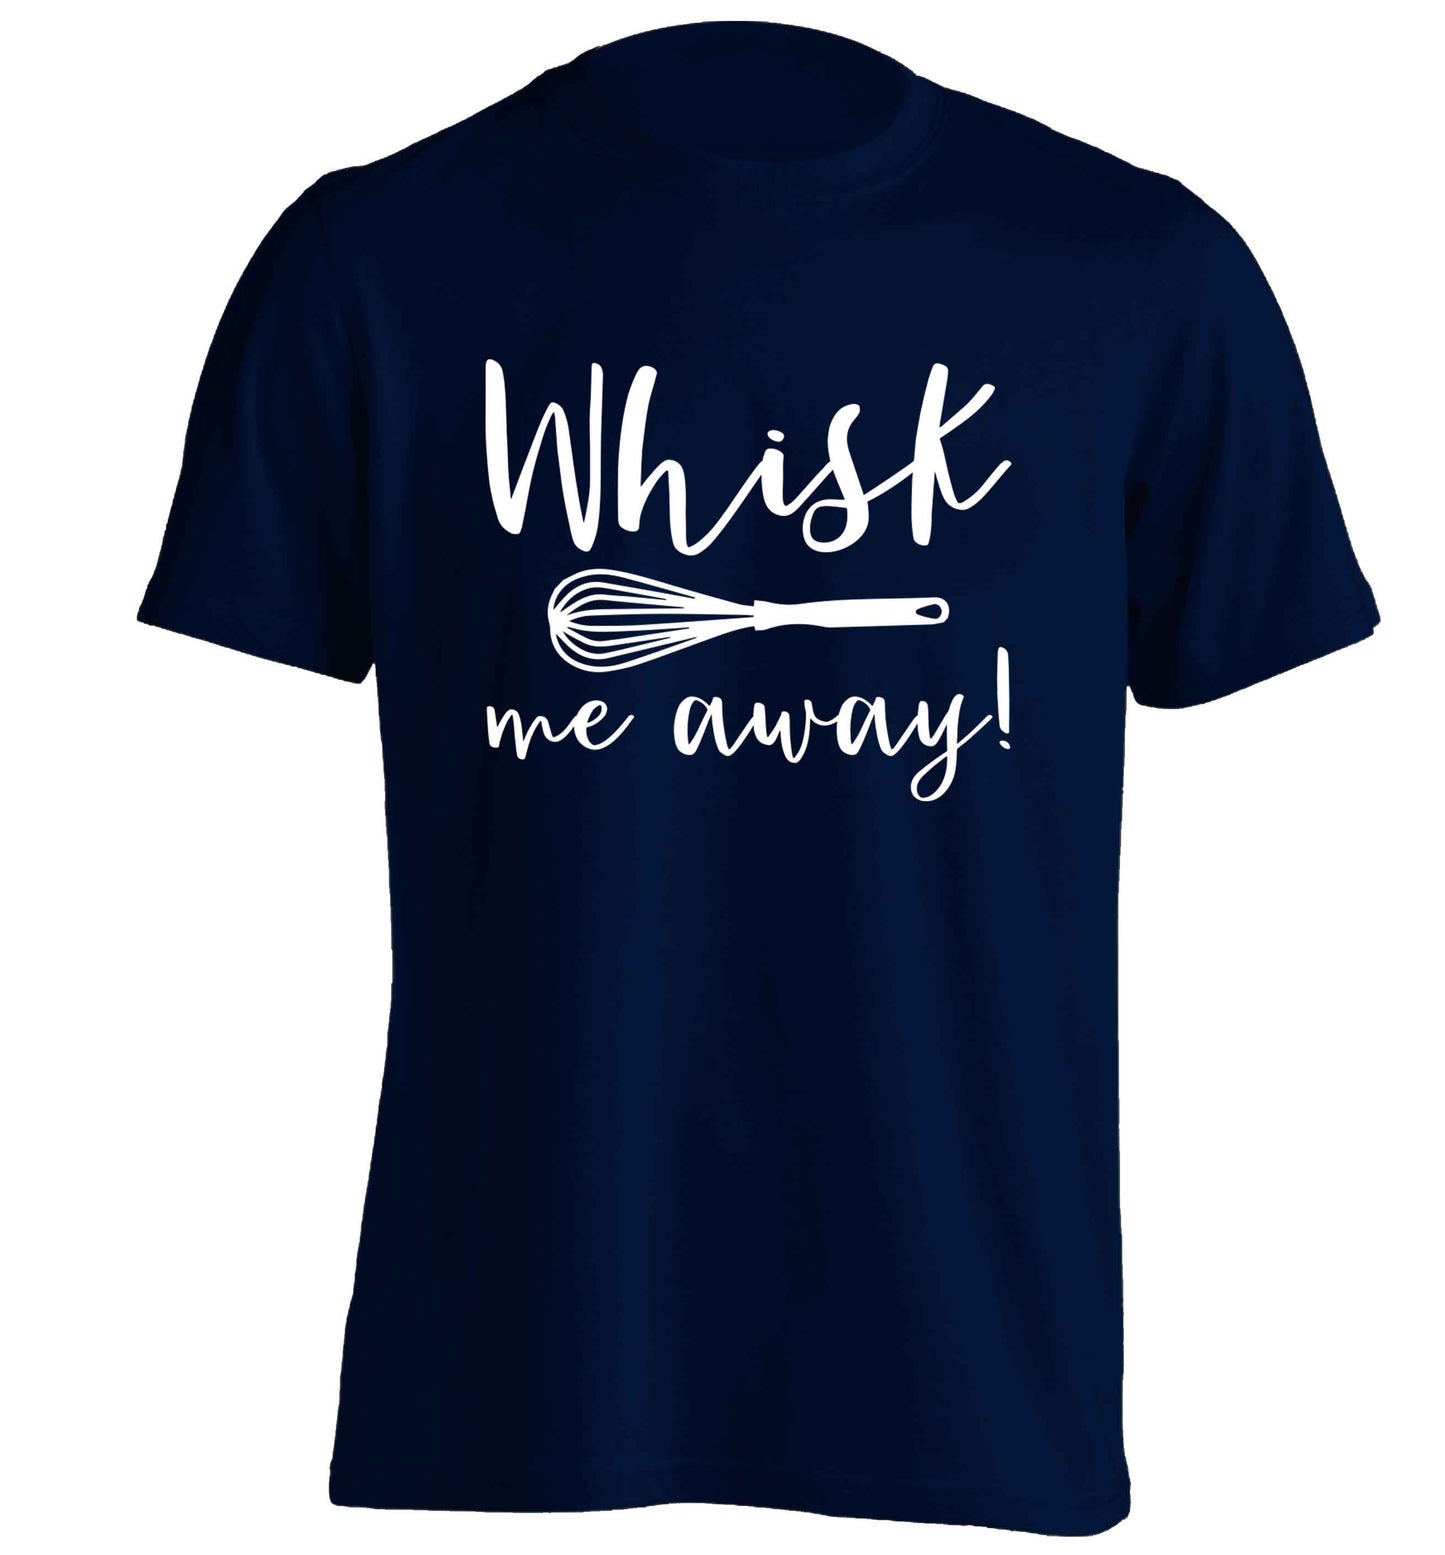 Whisk me away adults unisex navy Tshirt 2XL